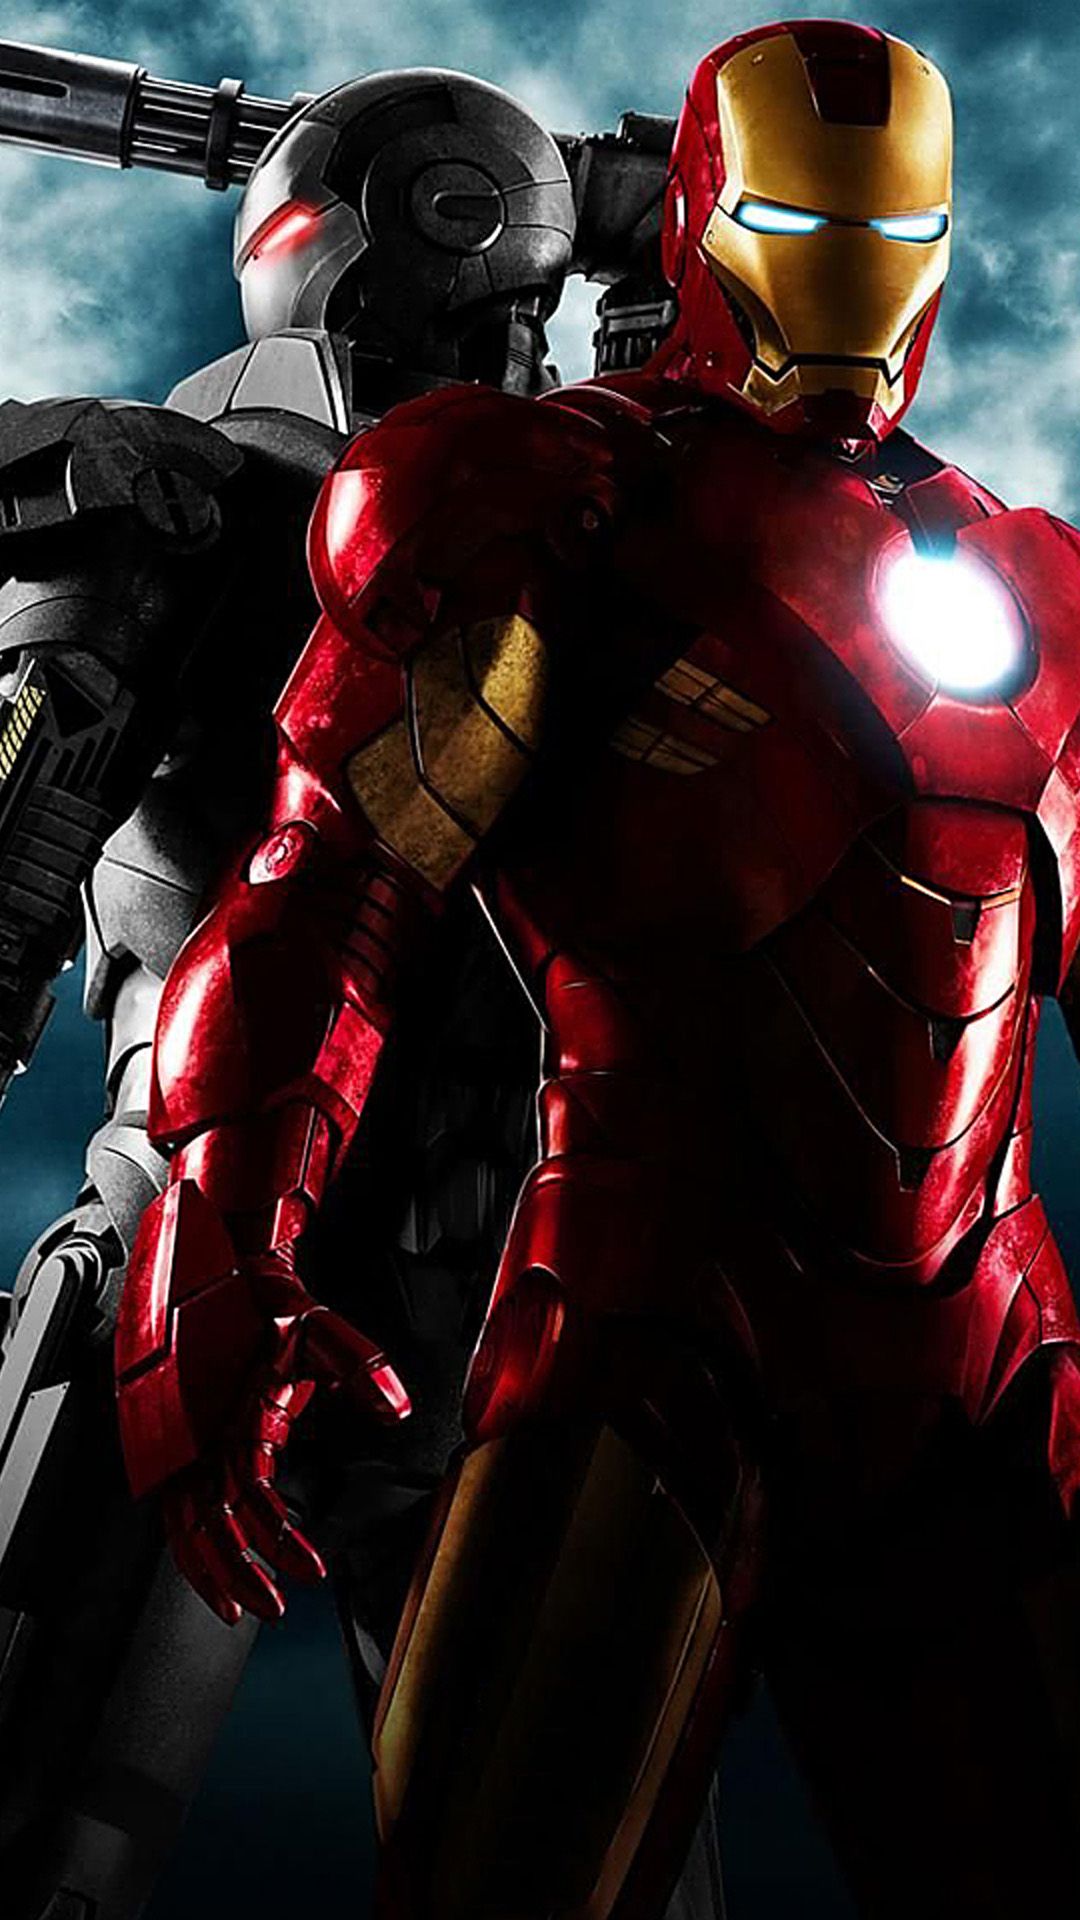 Iron Man Live Wallpaper Free Download For Android